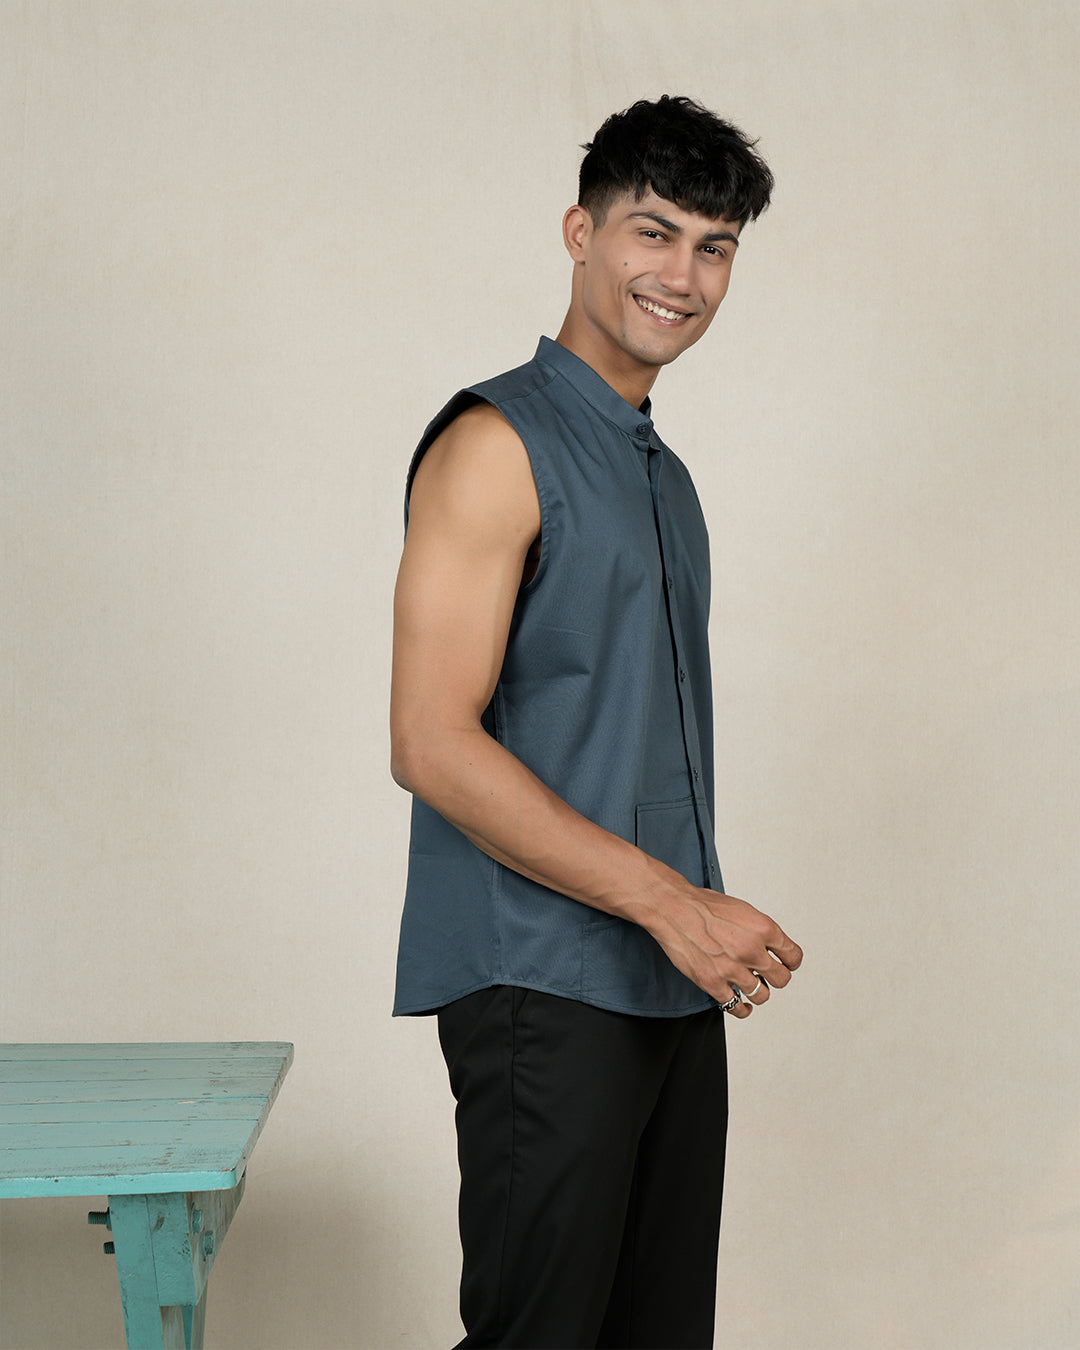 A smiling man with short, dark hair stands against a plain background. He is wearing a sleeveless, button-up, dark gray Sarcelle - Sleeveless Shirt made of premium cotton with a mandarin collar and black pants. He has a wristwatch on his left hand and stands near a small, light blue table.